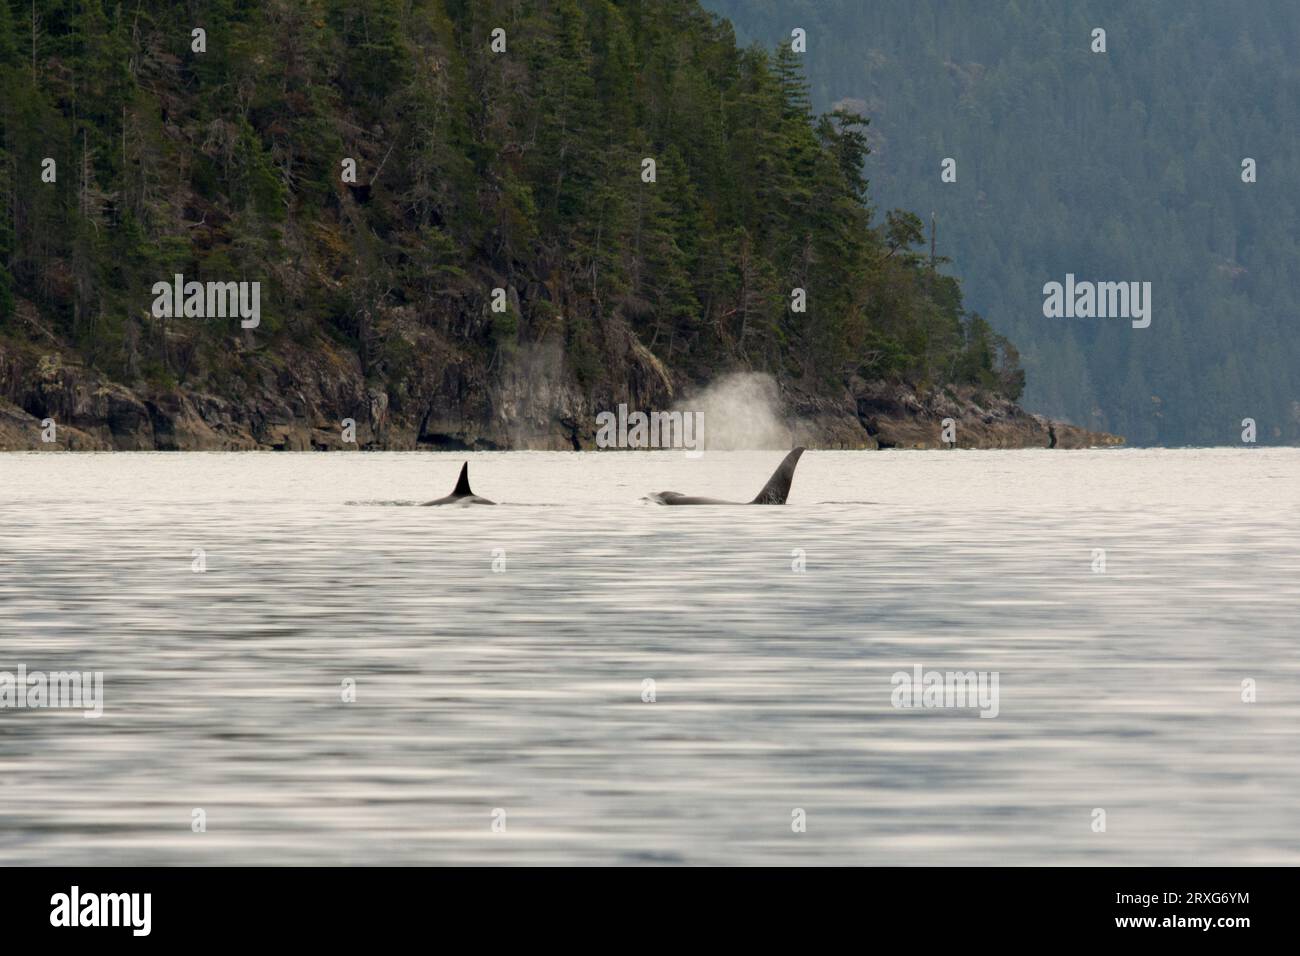 Orca swimming along the coast in Discovery Passage between the east coast of Vancouver Island and the Canadian mainland. Stock Photo